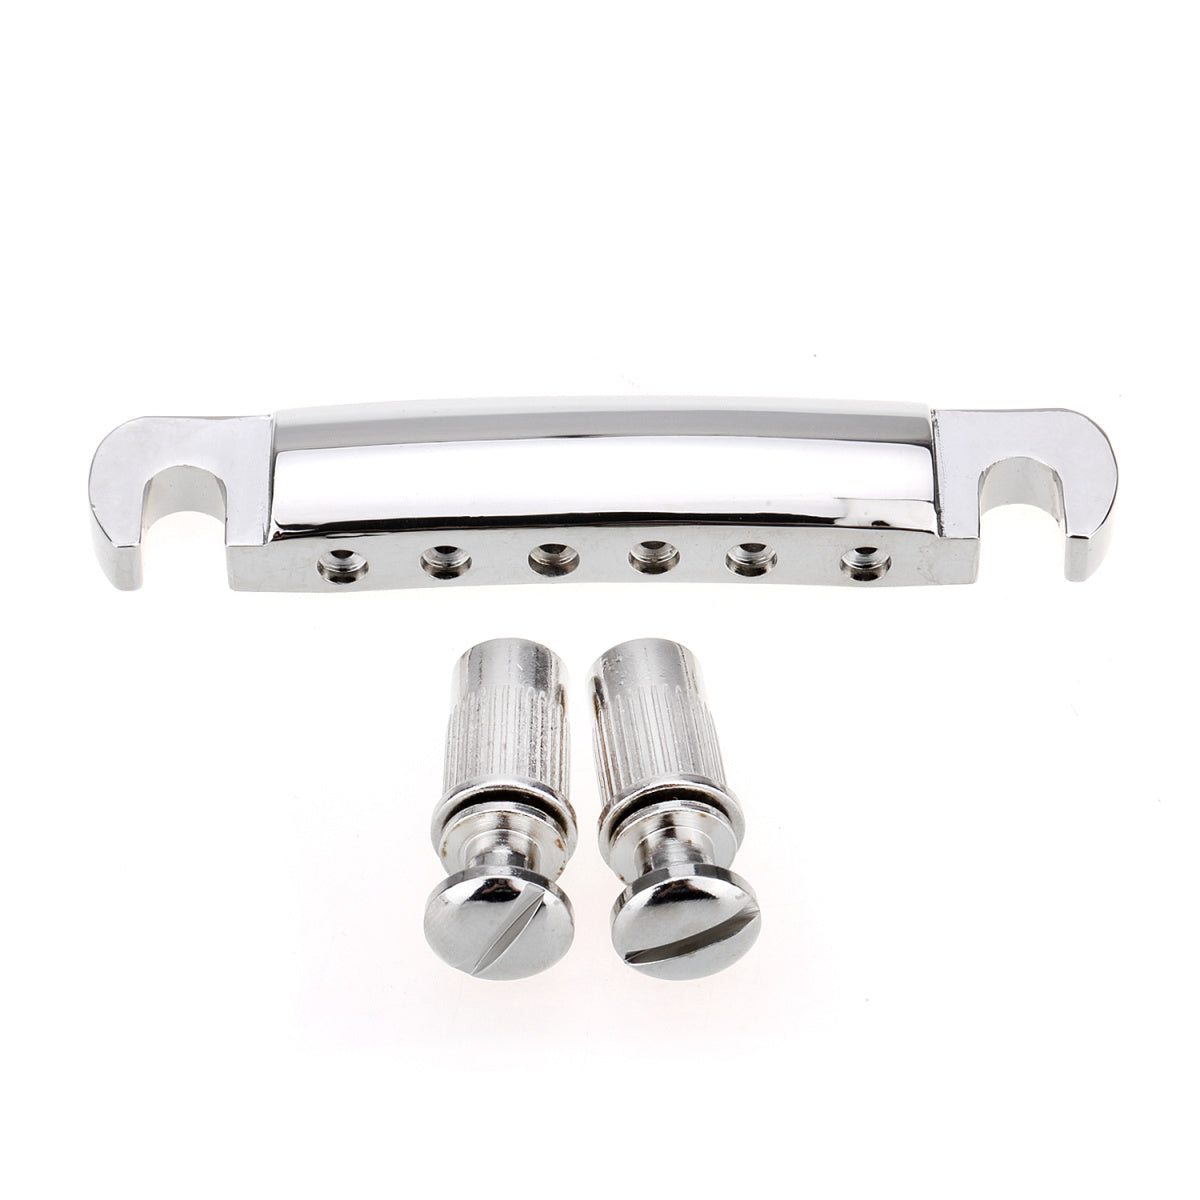 Musiclily Pro 52.5mm TOM Tune-o-matic Tailpiece for China made Epiphone Les Paul Guitar Replacement, Chrome